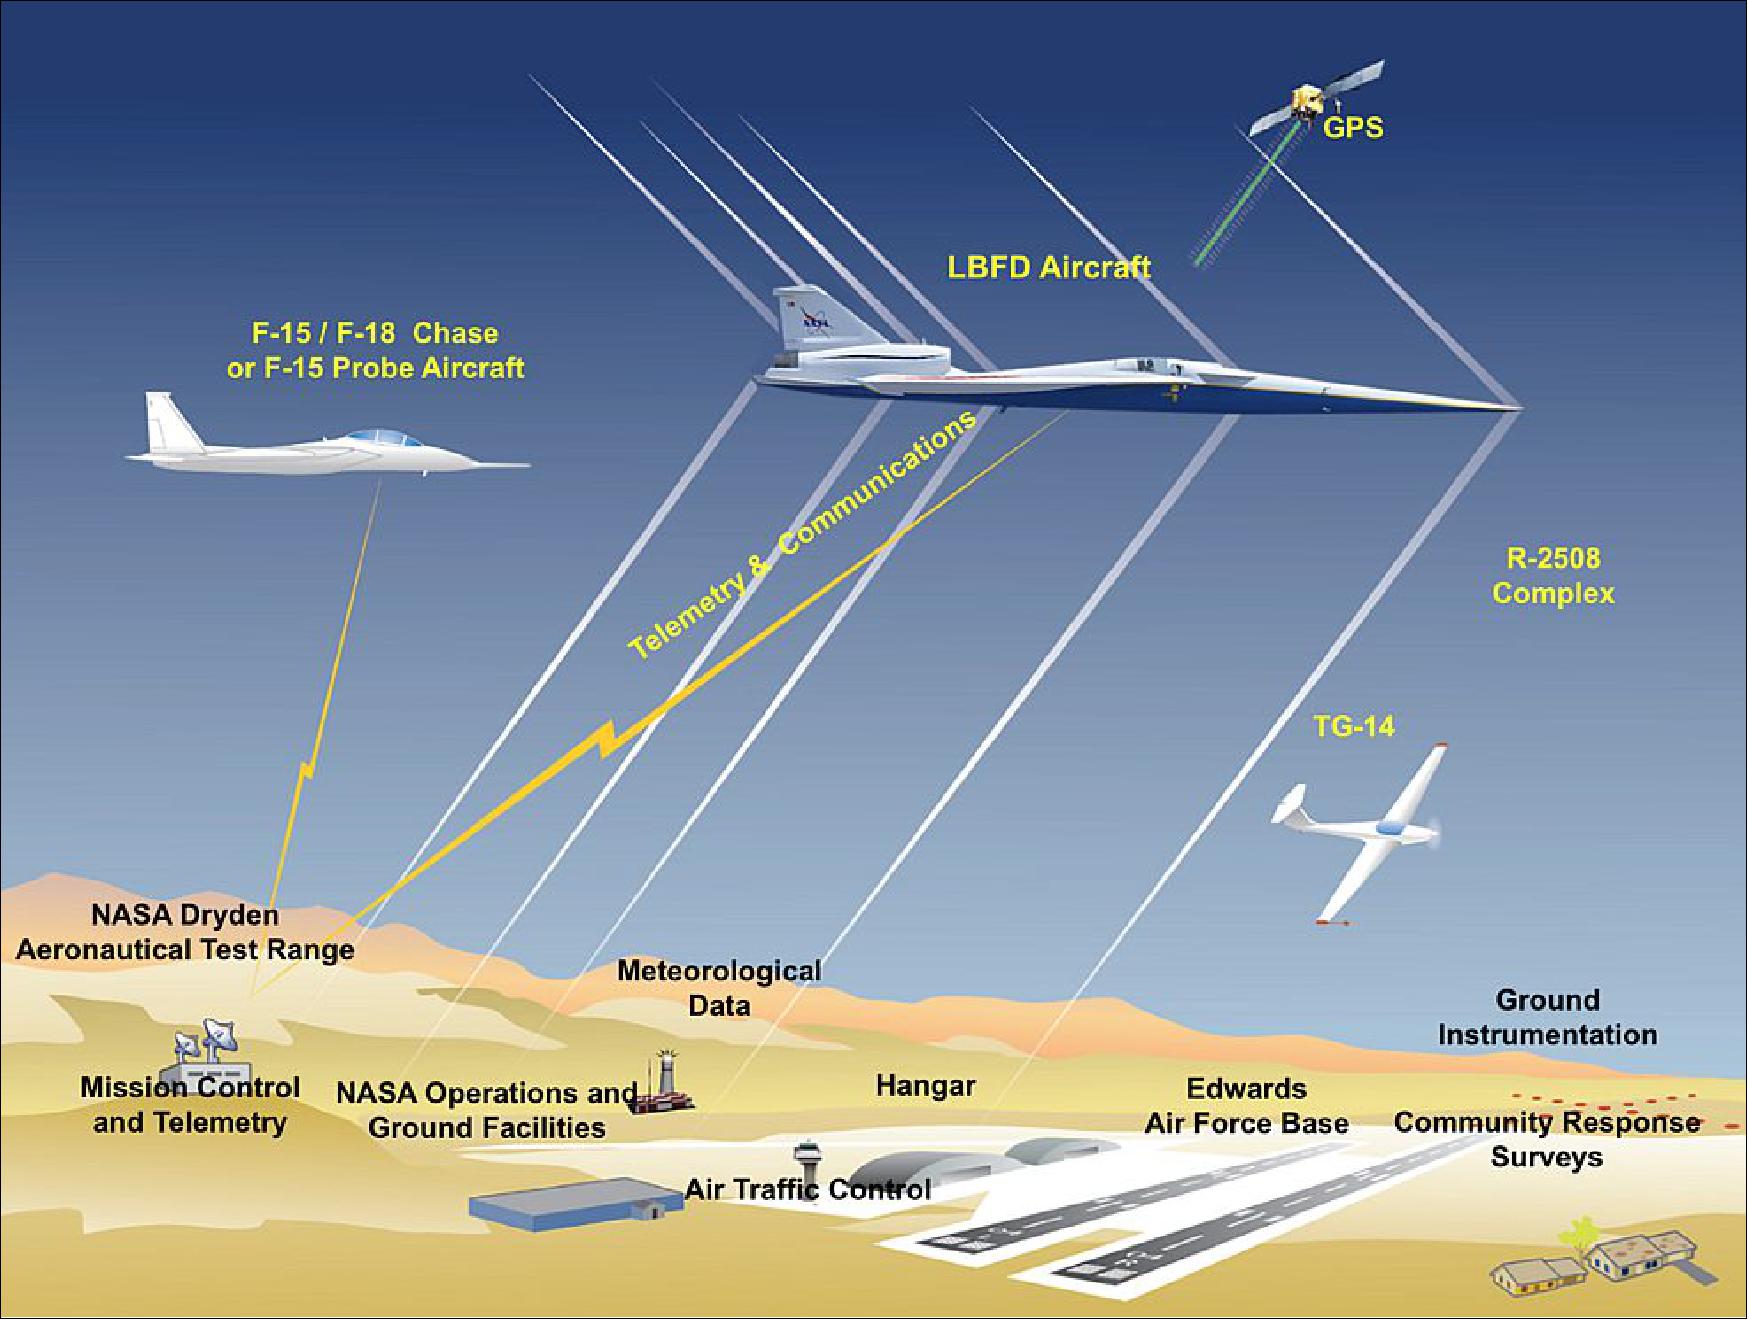 Figure 1: This graphic shows the Concept of Operations, or "ConOps", for the Low-Boom Flight Demonstration mission. The mission has three phases. Phases 1 and 2 will be conducted within the R-2508 Complex at Edwards Air Force Base in California, using the facilities and support aircraft depicted here and including overflights of the base community. For Phase 3, the demonstrator will be deployed to communities in other parts of the country to conduct low -boom community response overflight studies (image credit: NASA)